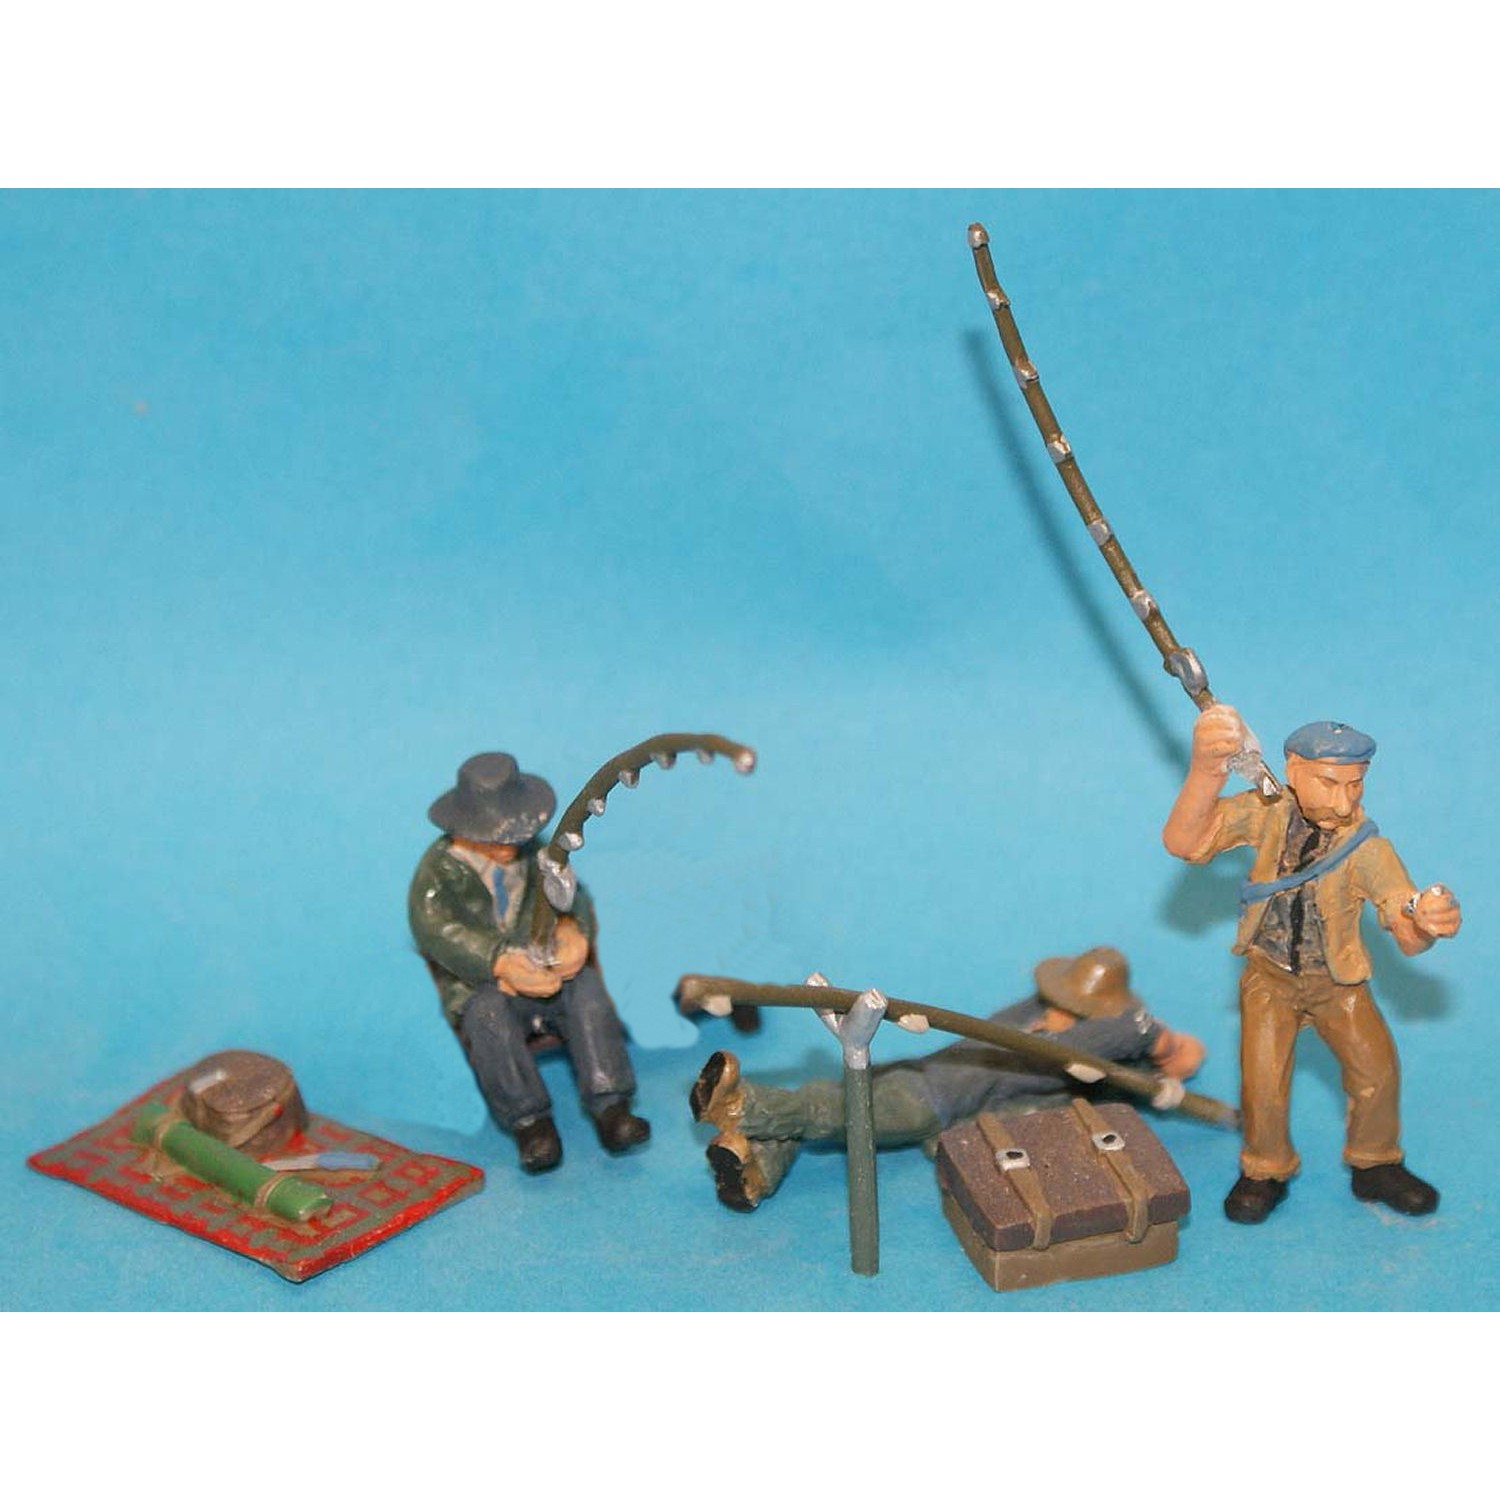 Langley Models Bank/Riverside Fisherman equipment and rods O Scale 1:43 UNPAINTED Model Kit OF28